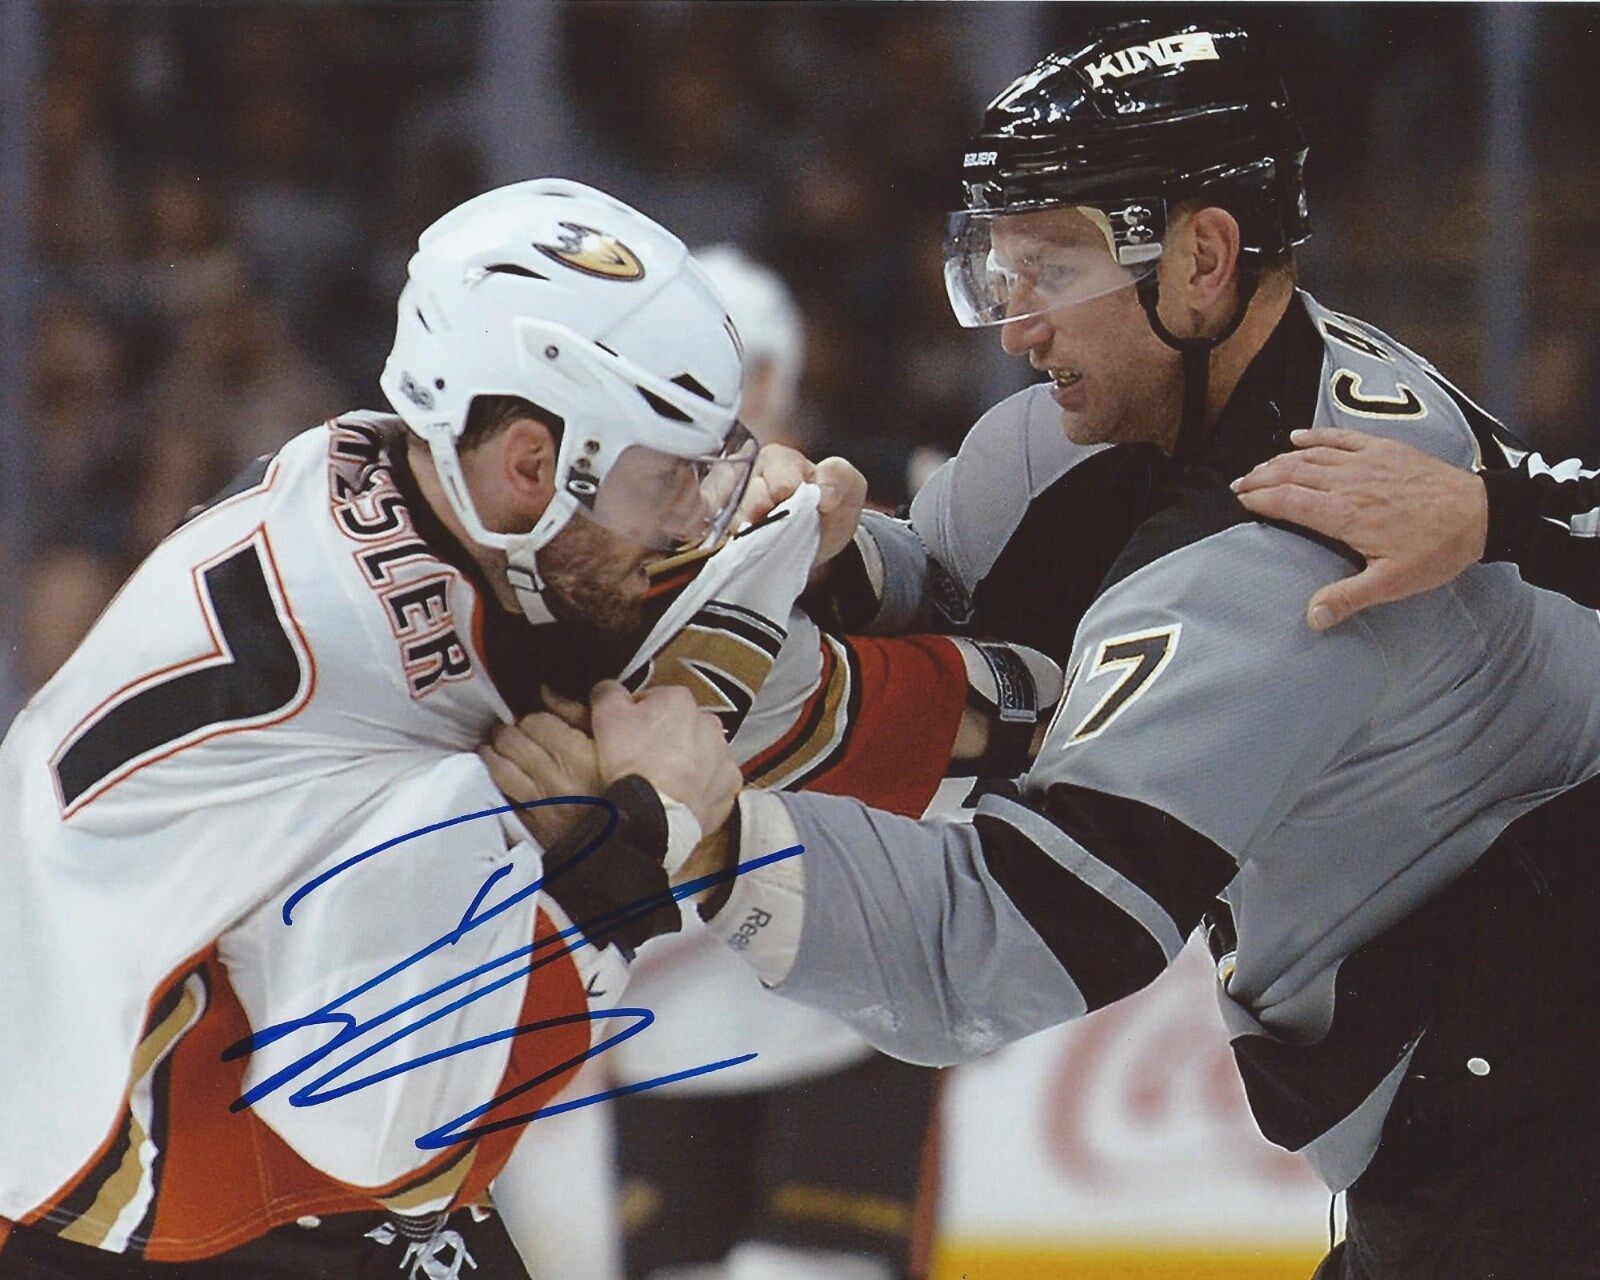 Ryan Kesler Signed 8x10 Fight Photo Poster painting Anaheim Ducks Autographed COA